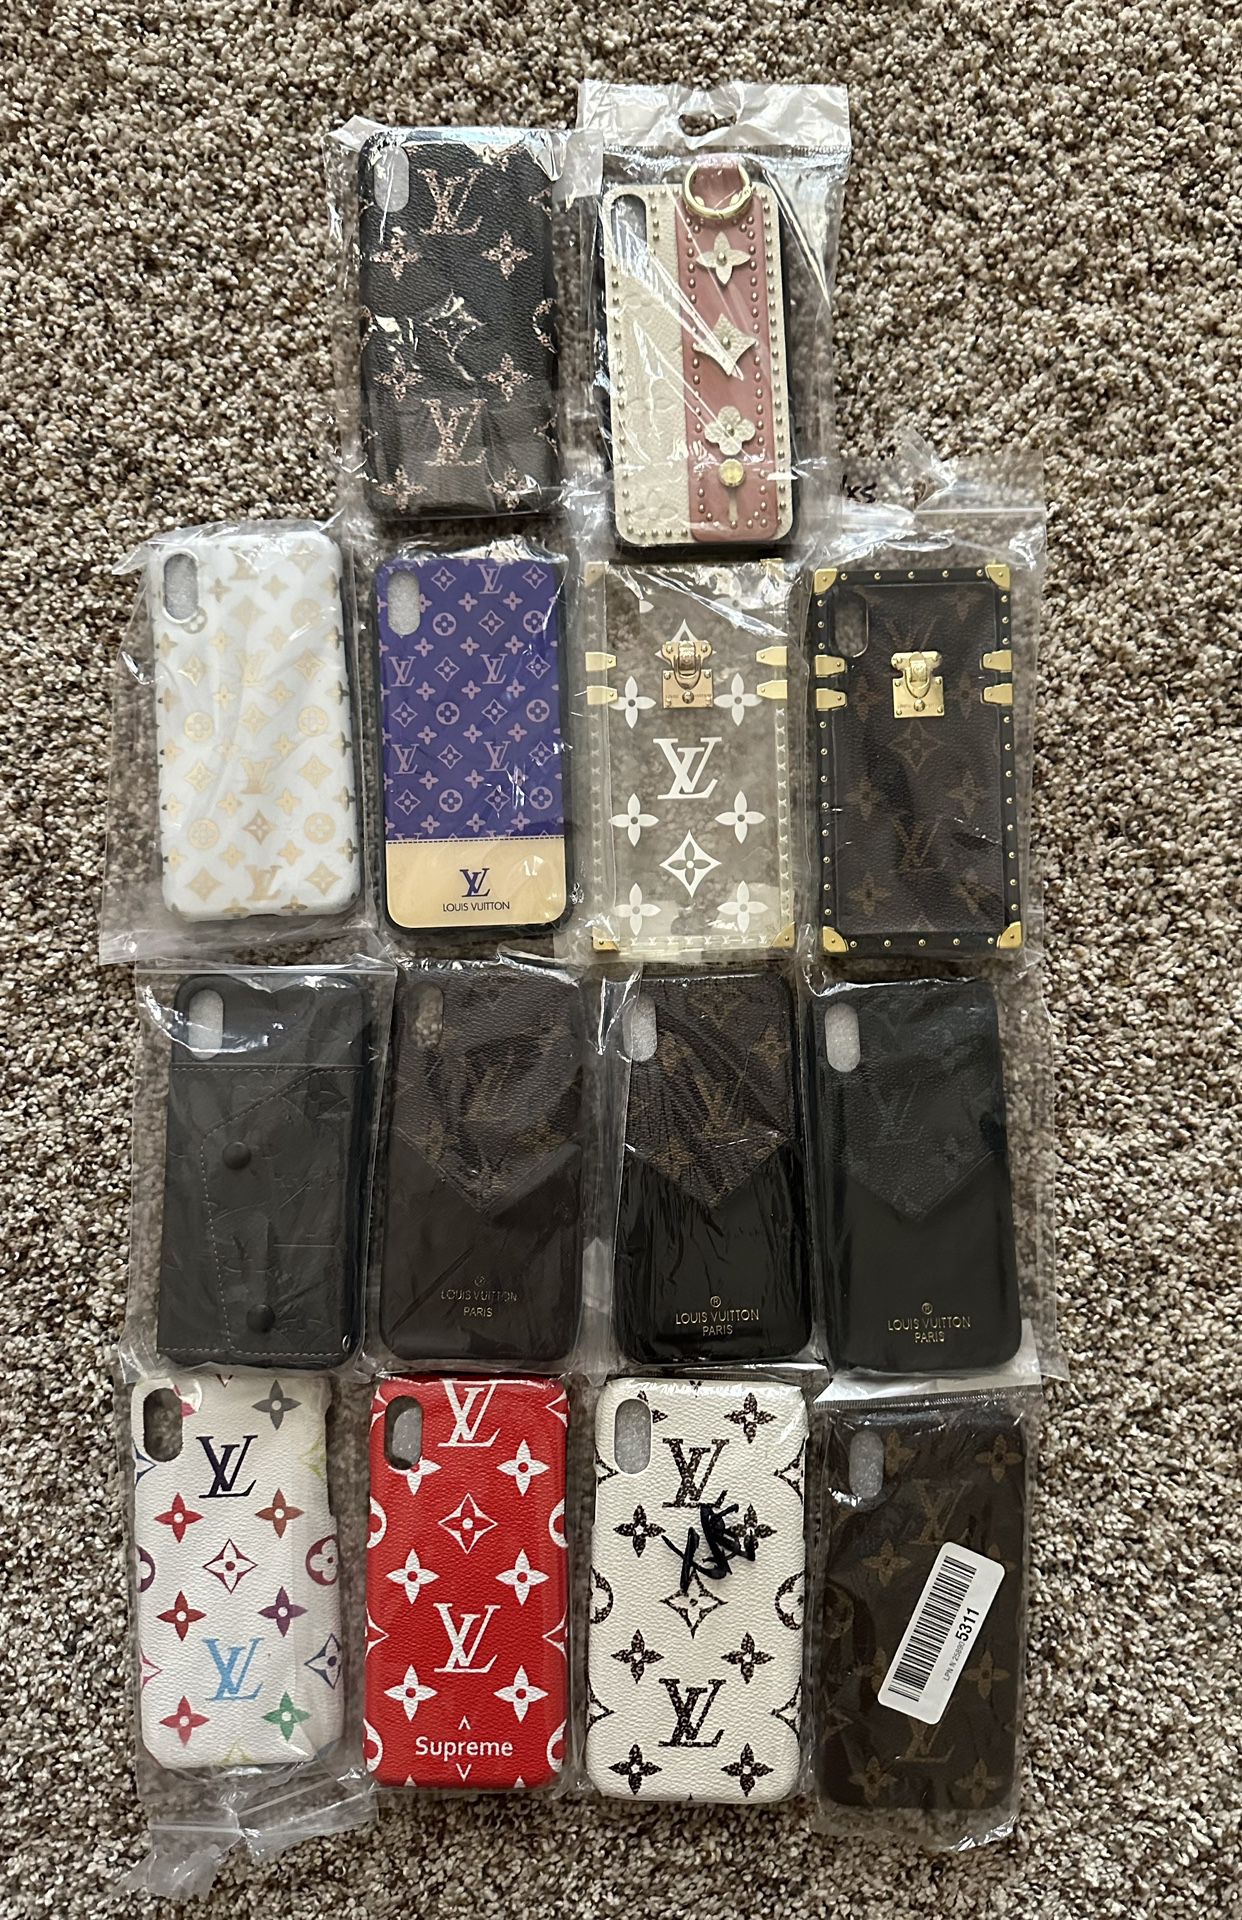 IPhone X/XS Cases $1.00each or 6 for $5.00 